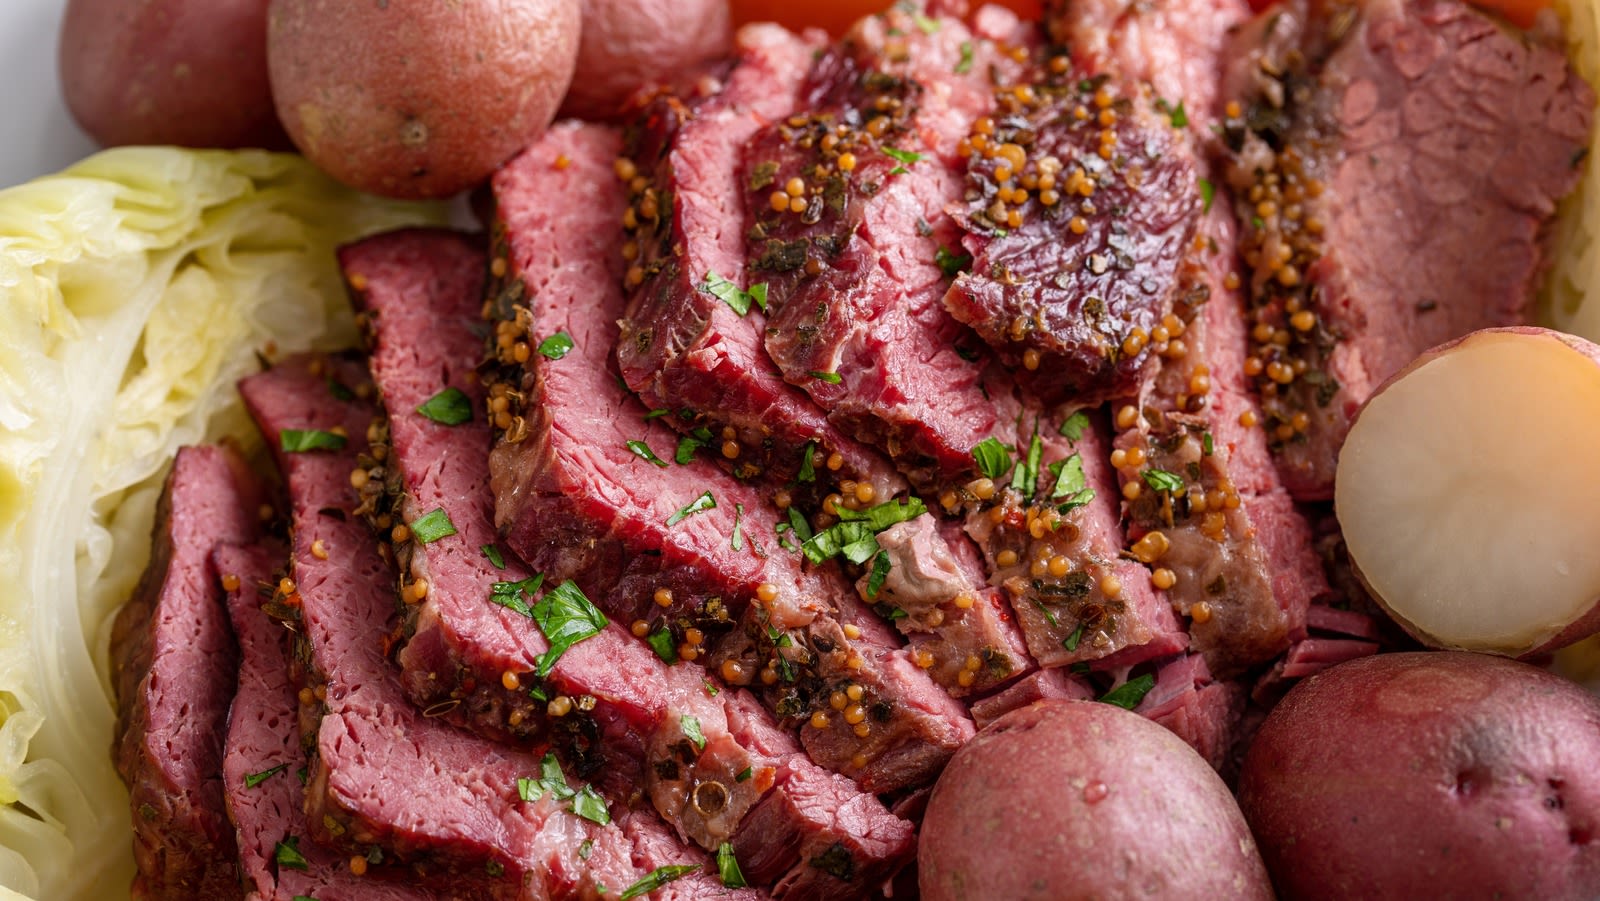 The Best Cut Of Meat For The Most Tender Corned Beef